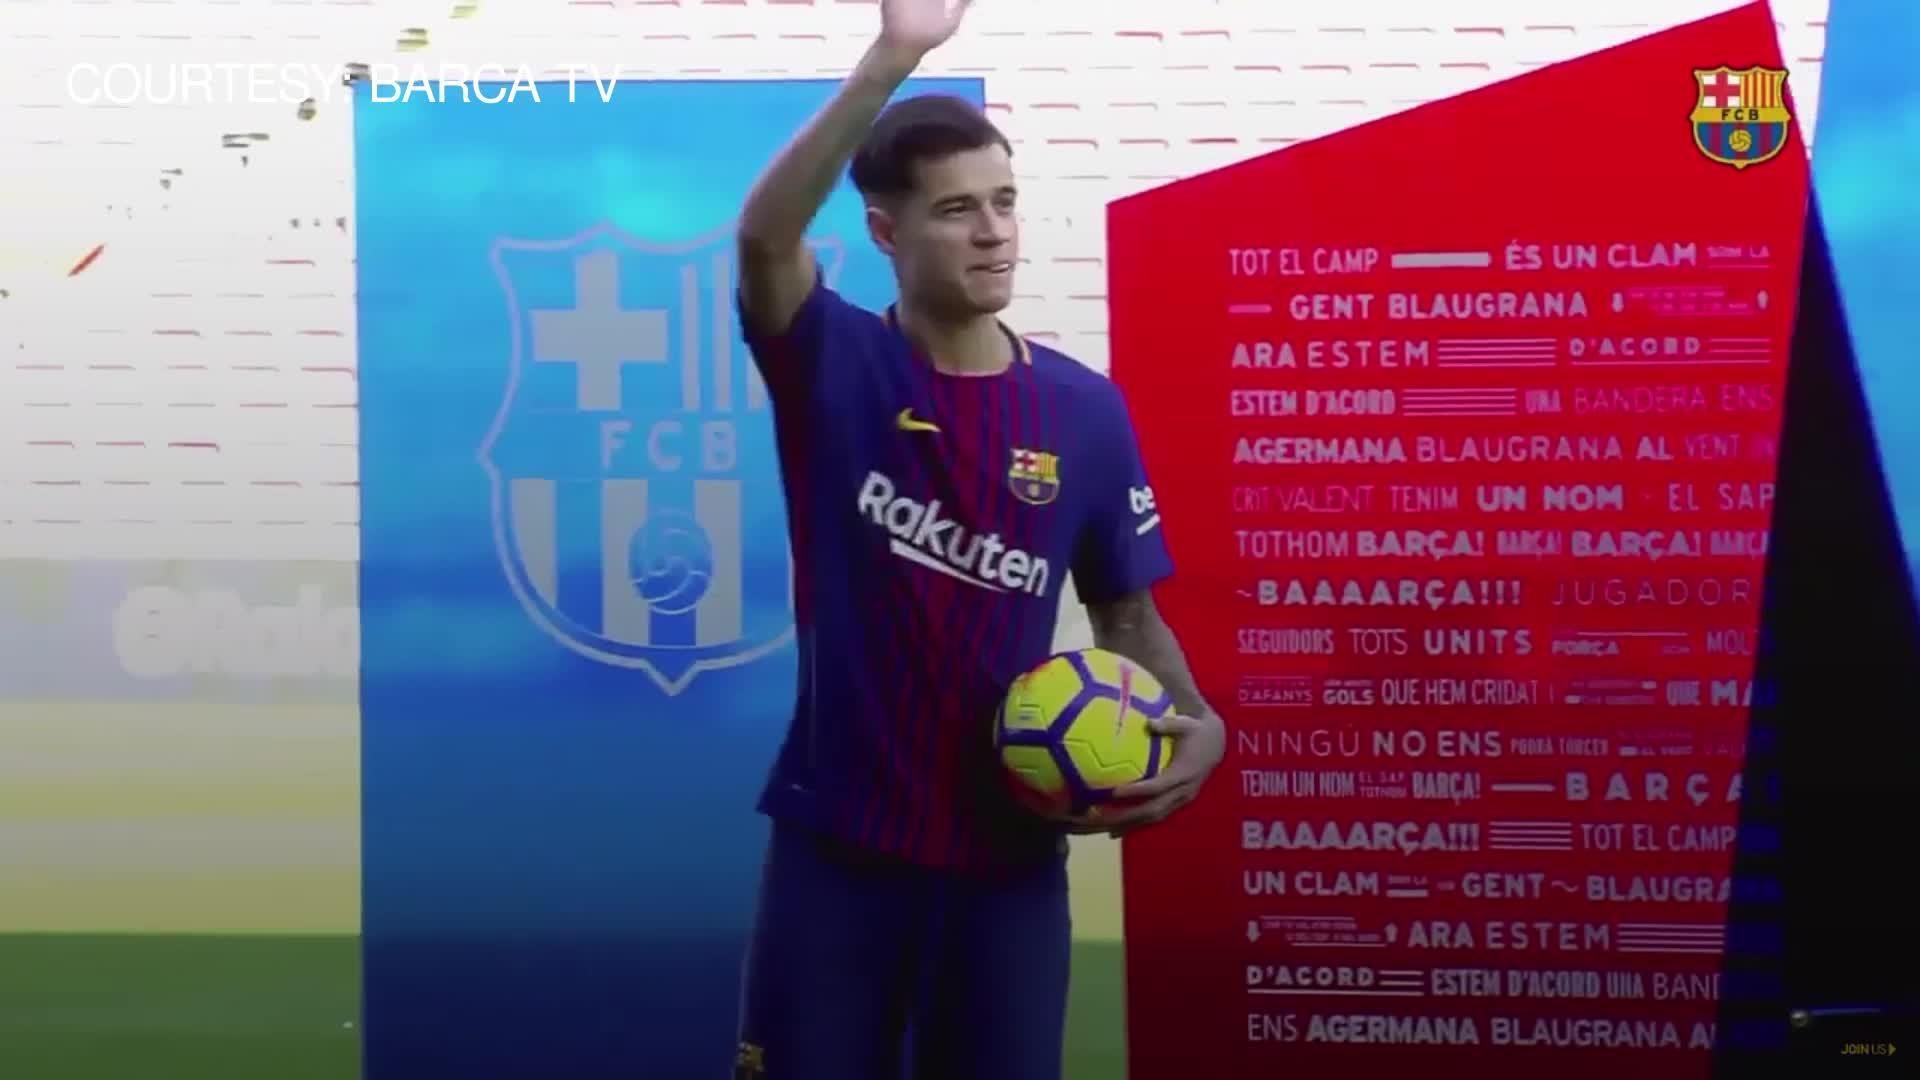 Philippe Coutinho transfer from Liverpool to Barcelona happened